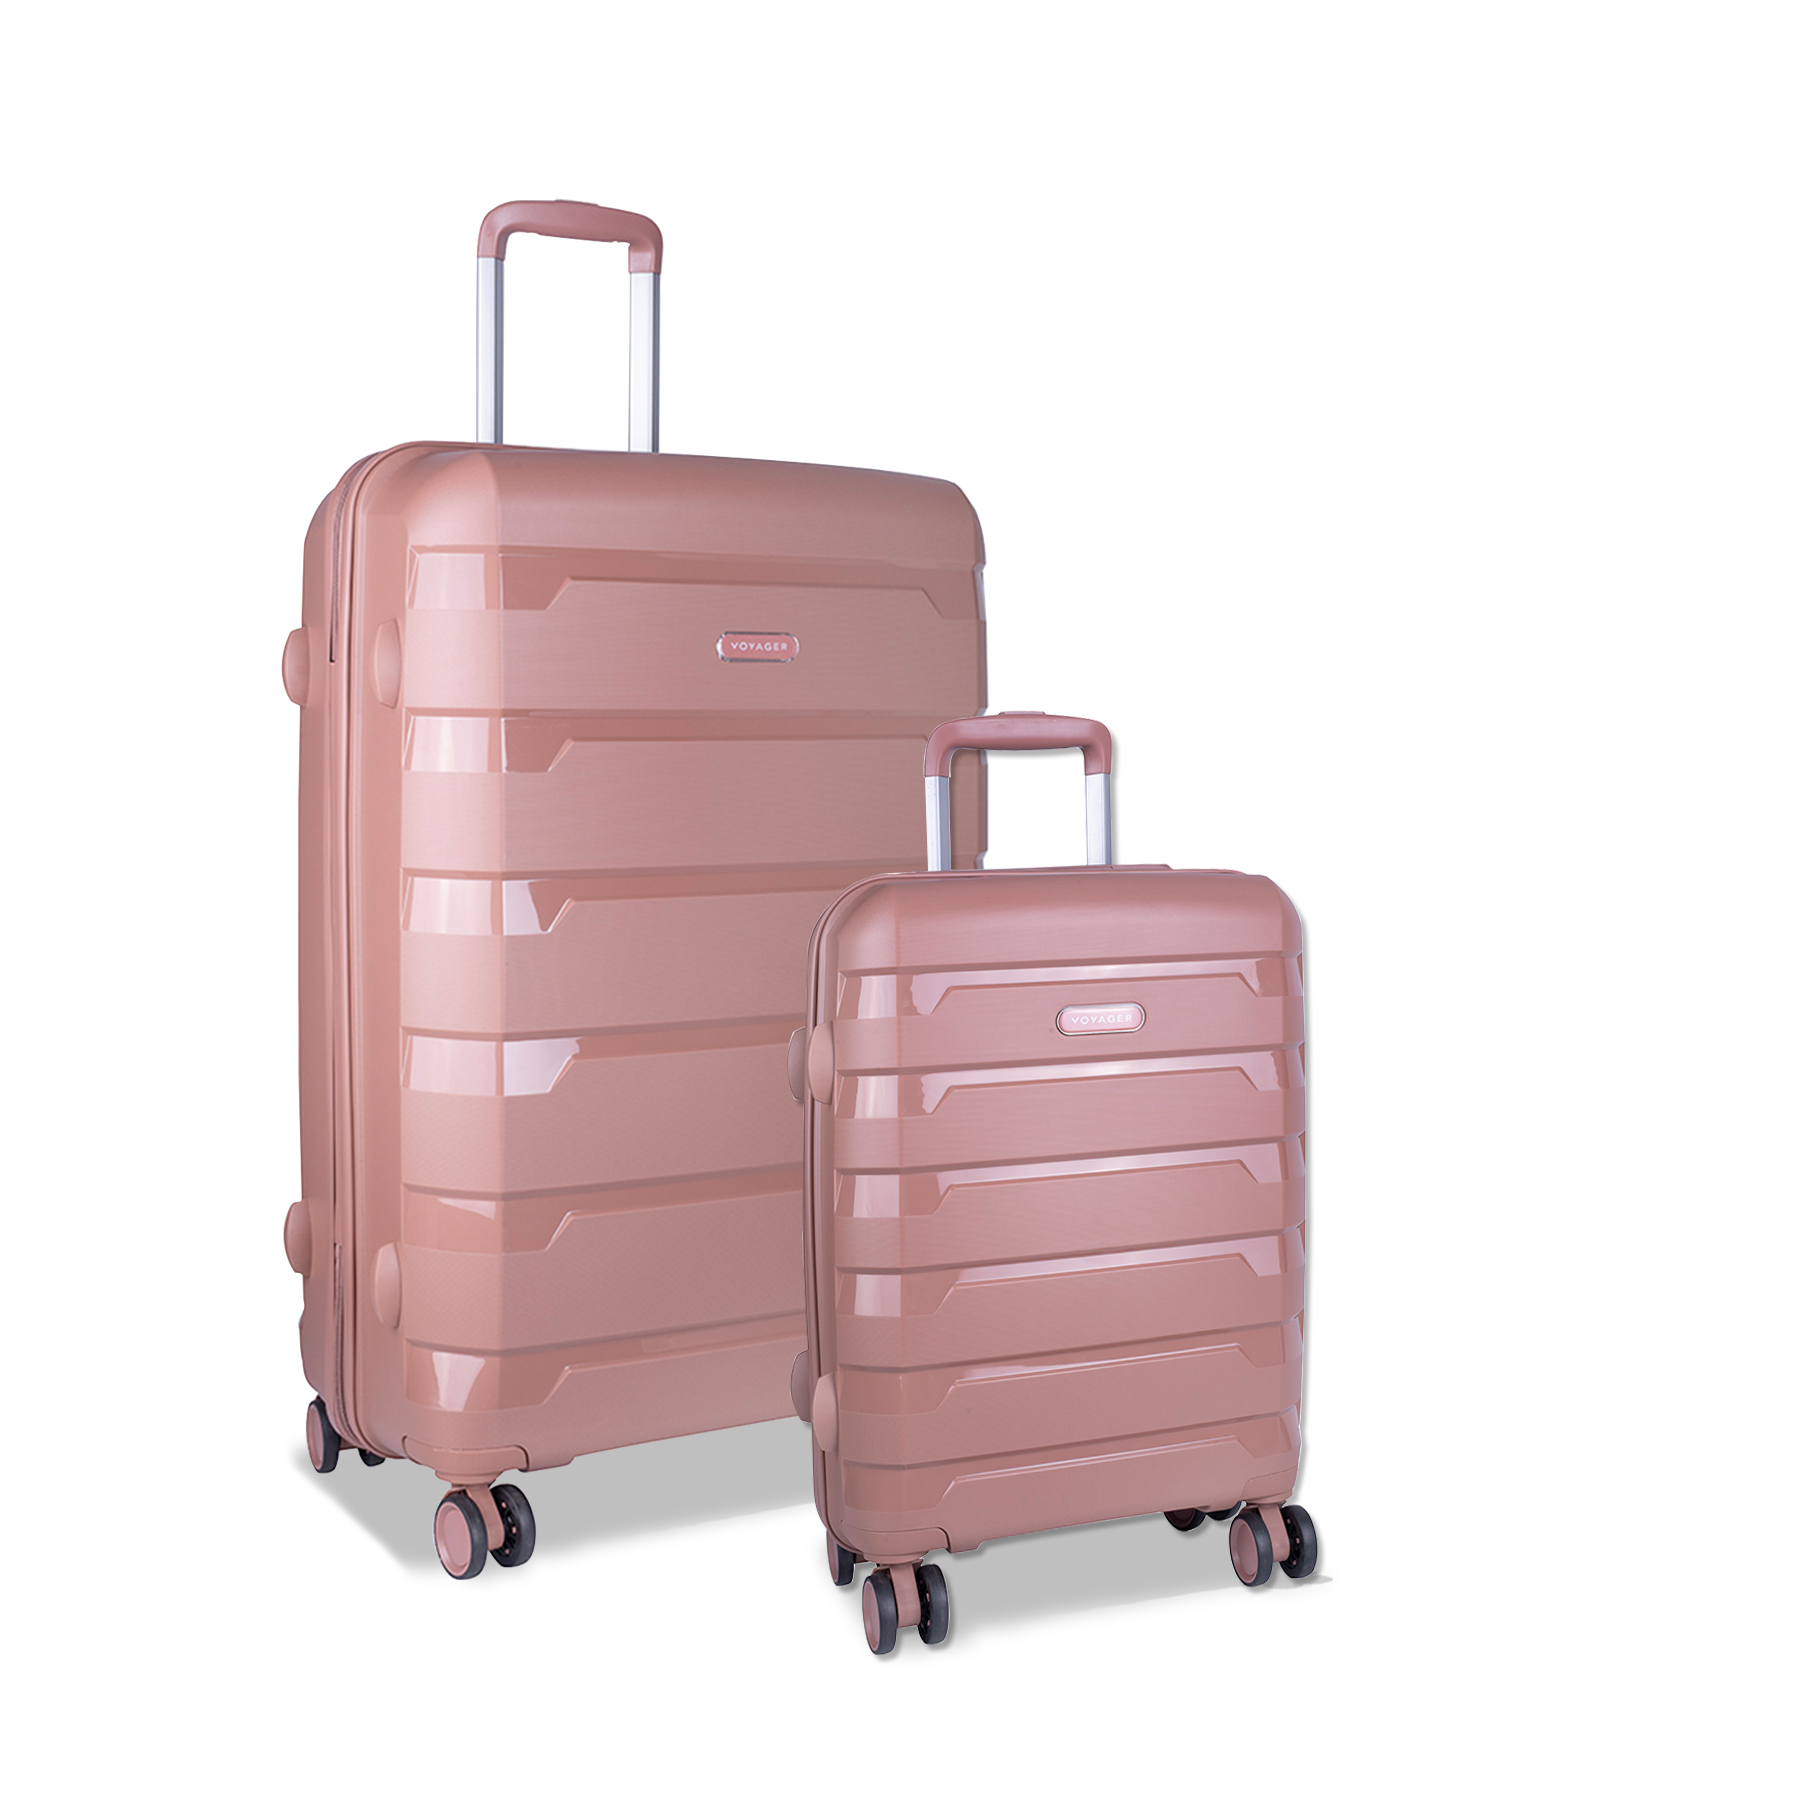 Pacific Trolley Case Sets